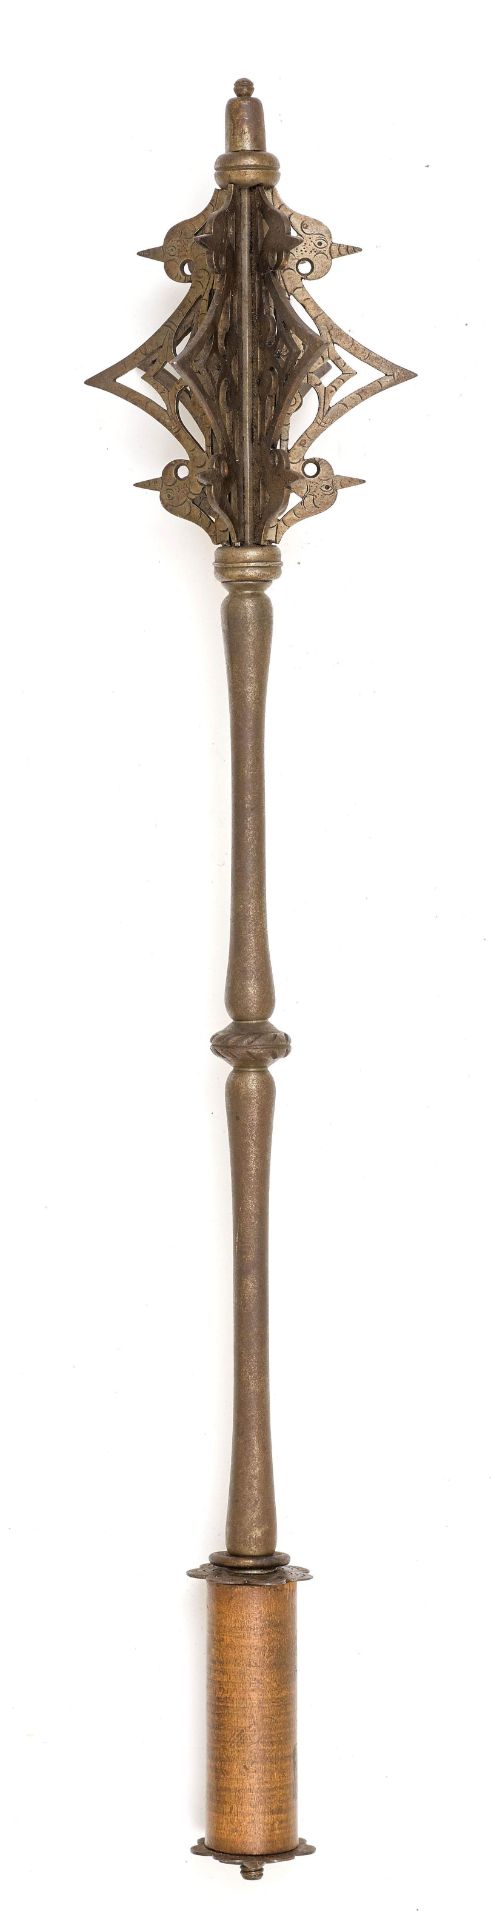 COURT SCEPTER DESIGNED AS A MACE - Image 2 of 2